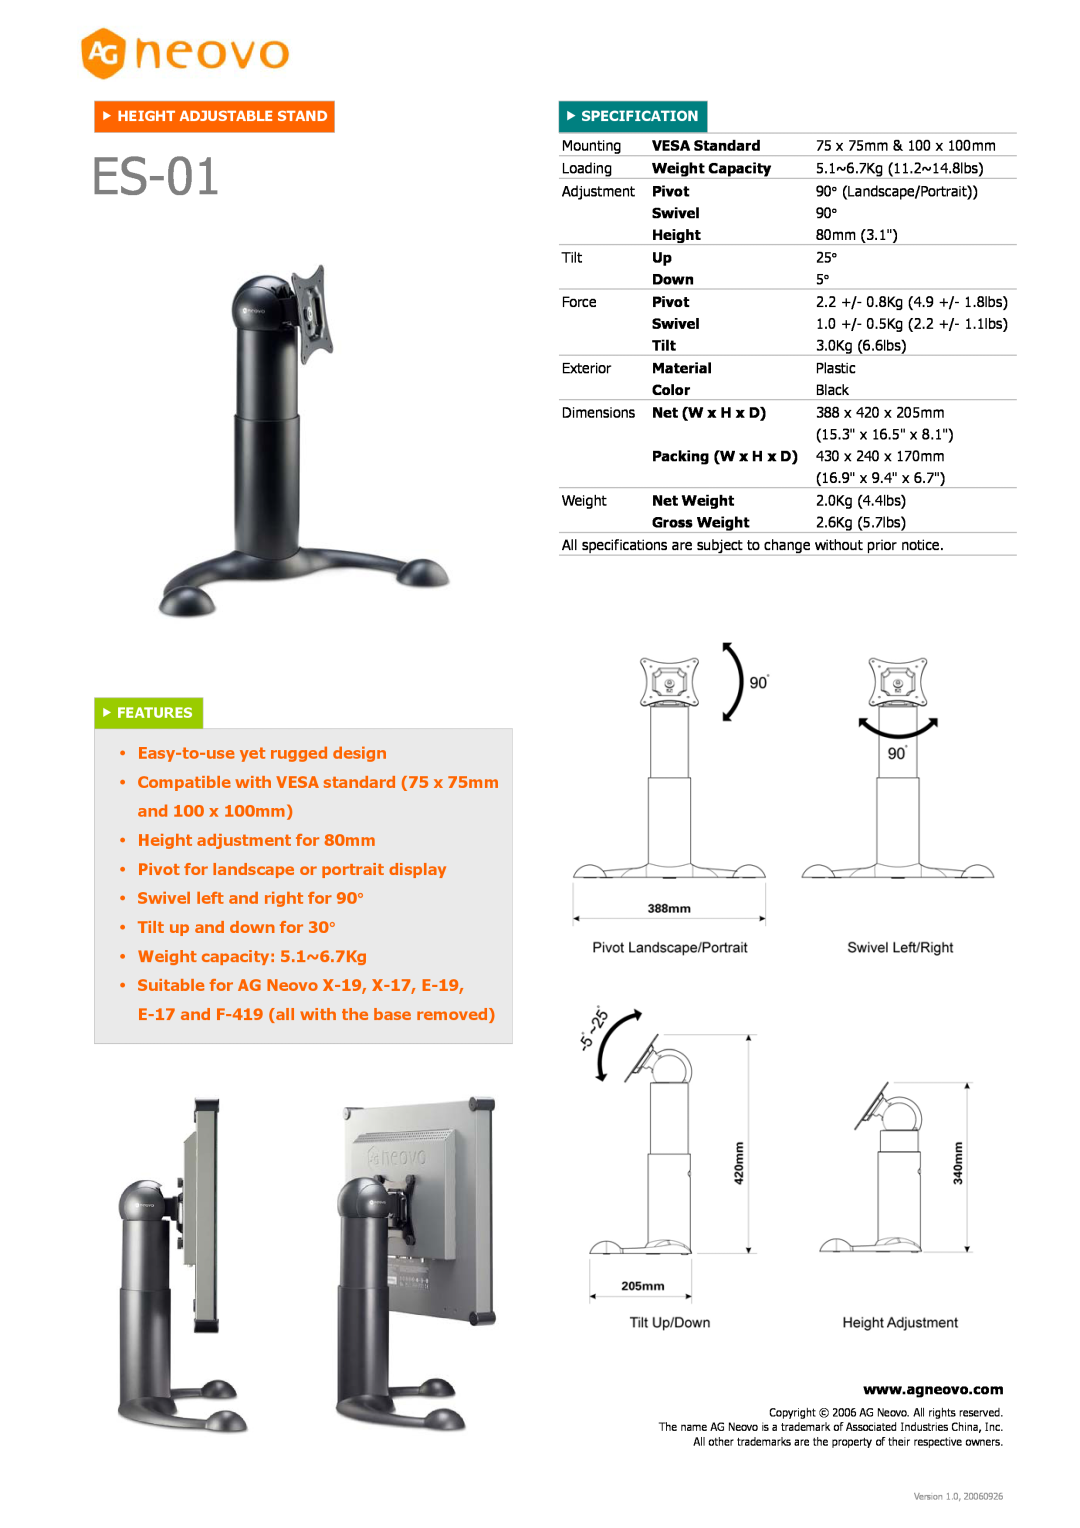 AG Neovo ES-01 dimensions Easy-to-useyet rugged design, Height adjustment for 80mm, fHEIGHT ADJUSTABLE STAND, fFEATURES 